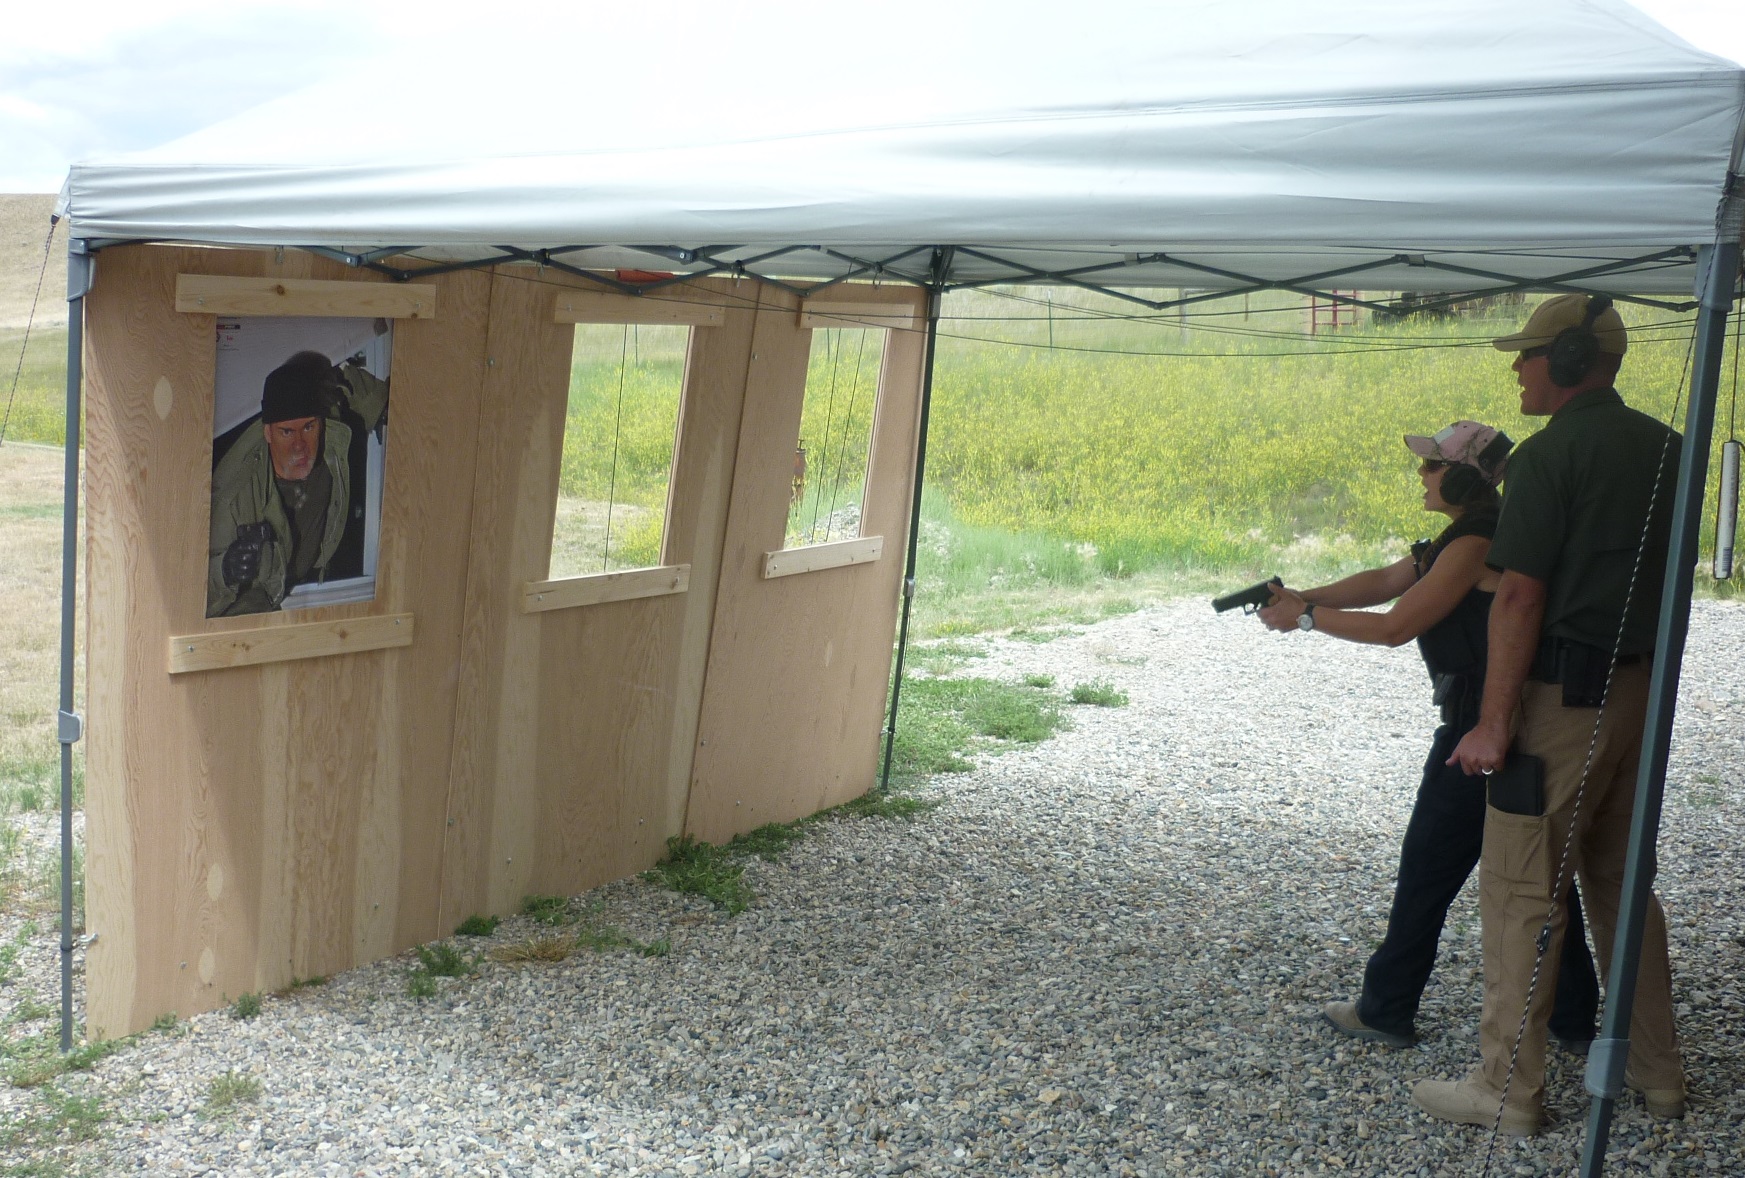 Realistic tactical training scenarios prepare you for home defense, personal protection and self defense, with training taught near San Antonio and Austin, Texas